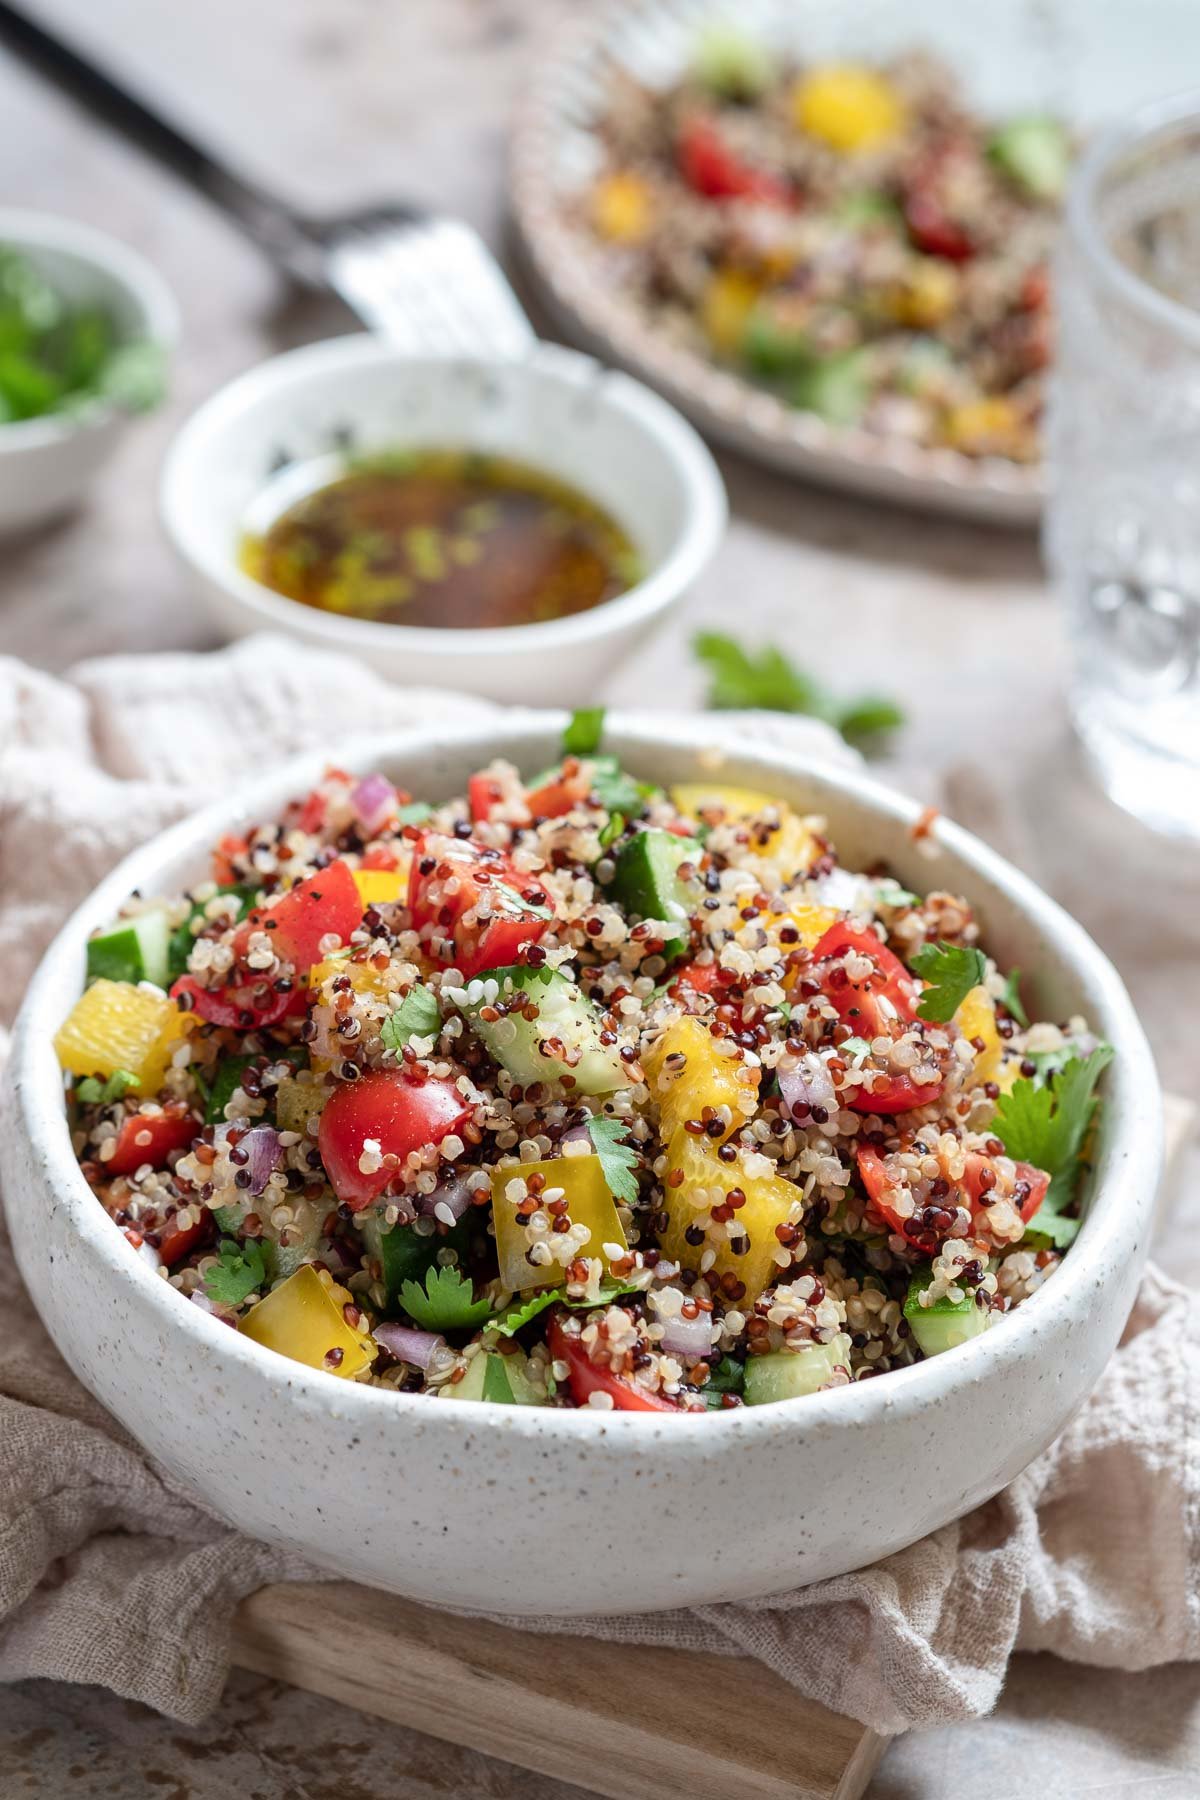 a quinoa salad with tomatoes, cucumber, red onion, mandarins, bell peppers and parsley.